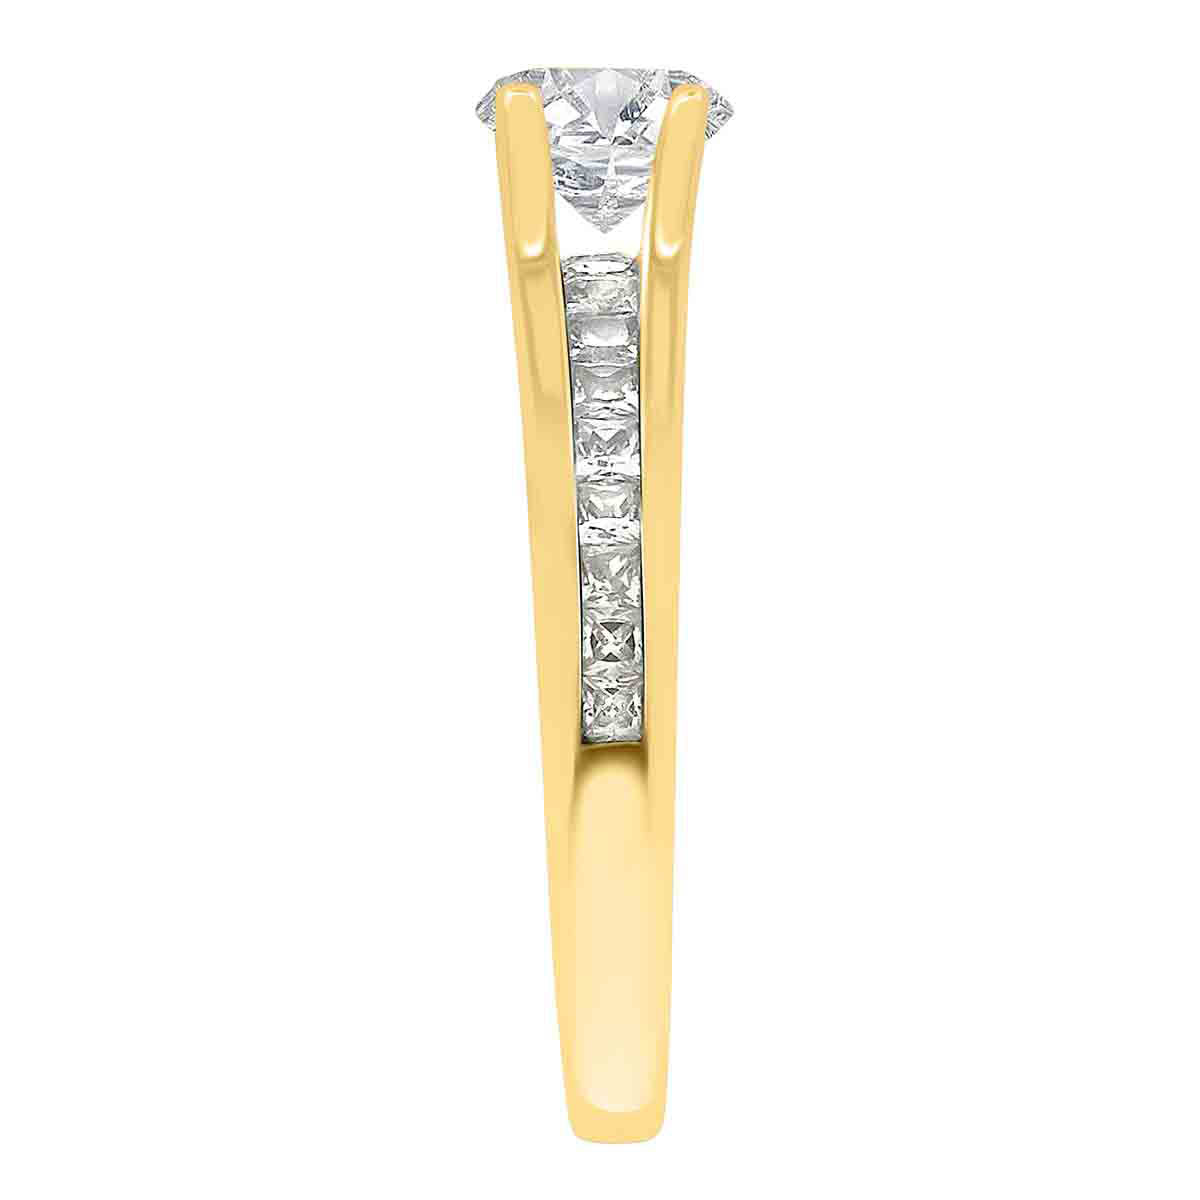 Channel Set Diamond Ring set in yellow gold viewed upright and from the side